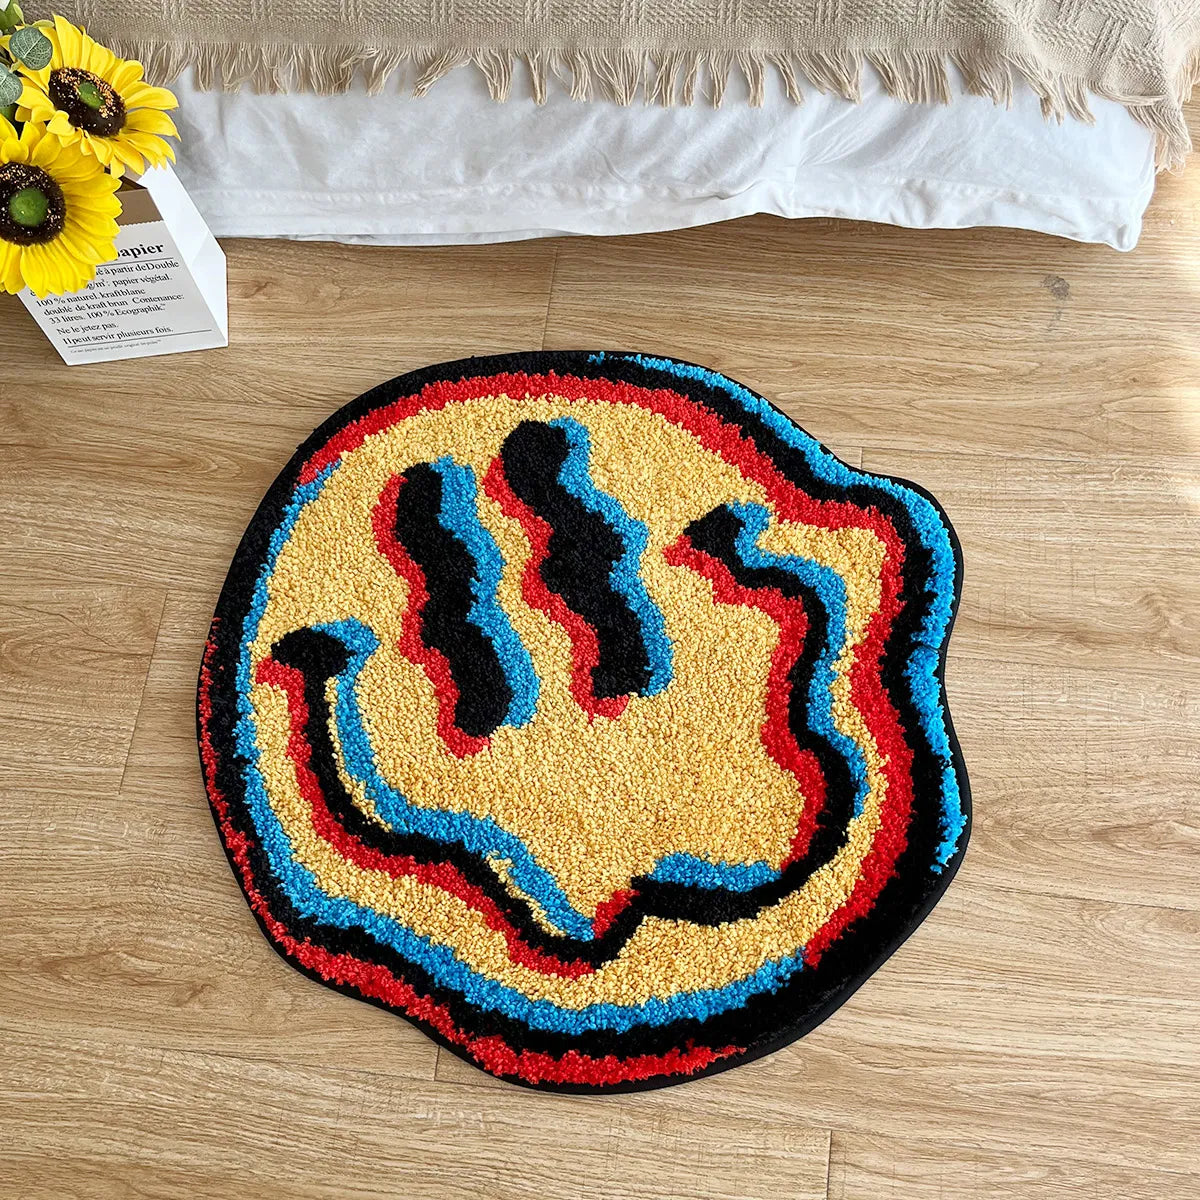 3D Smiling Face Hand-Crafted Rug